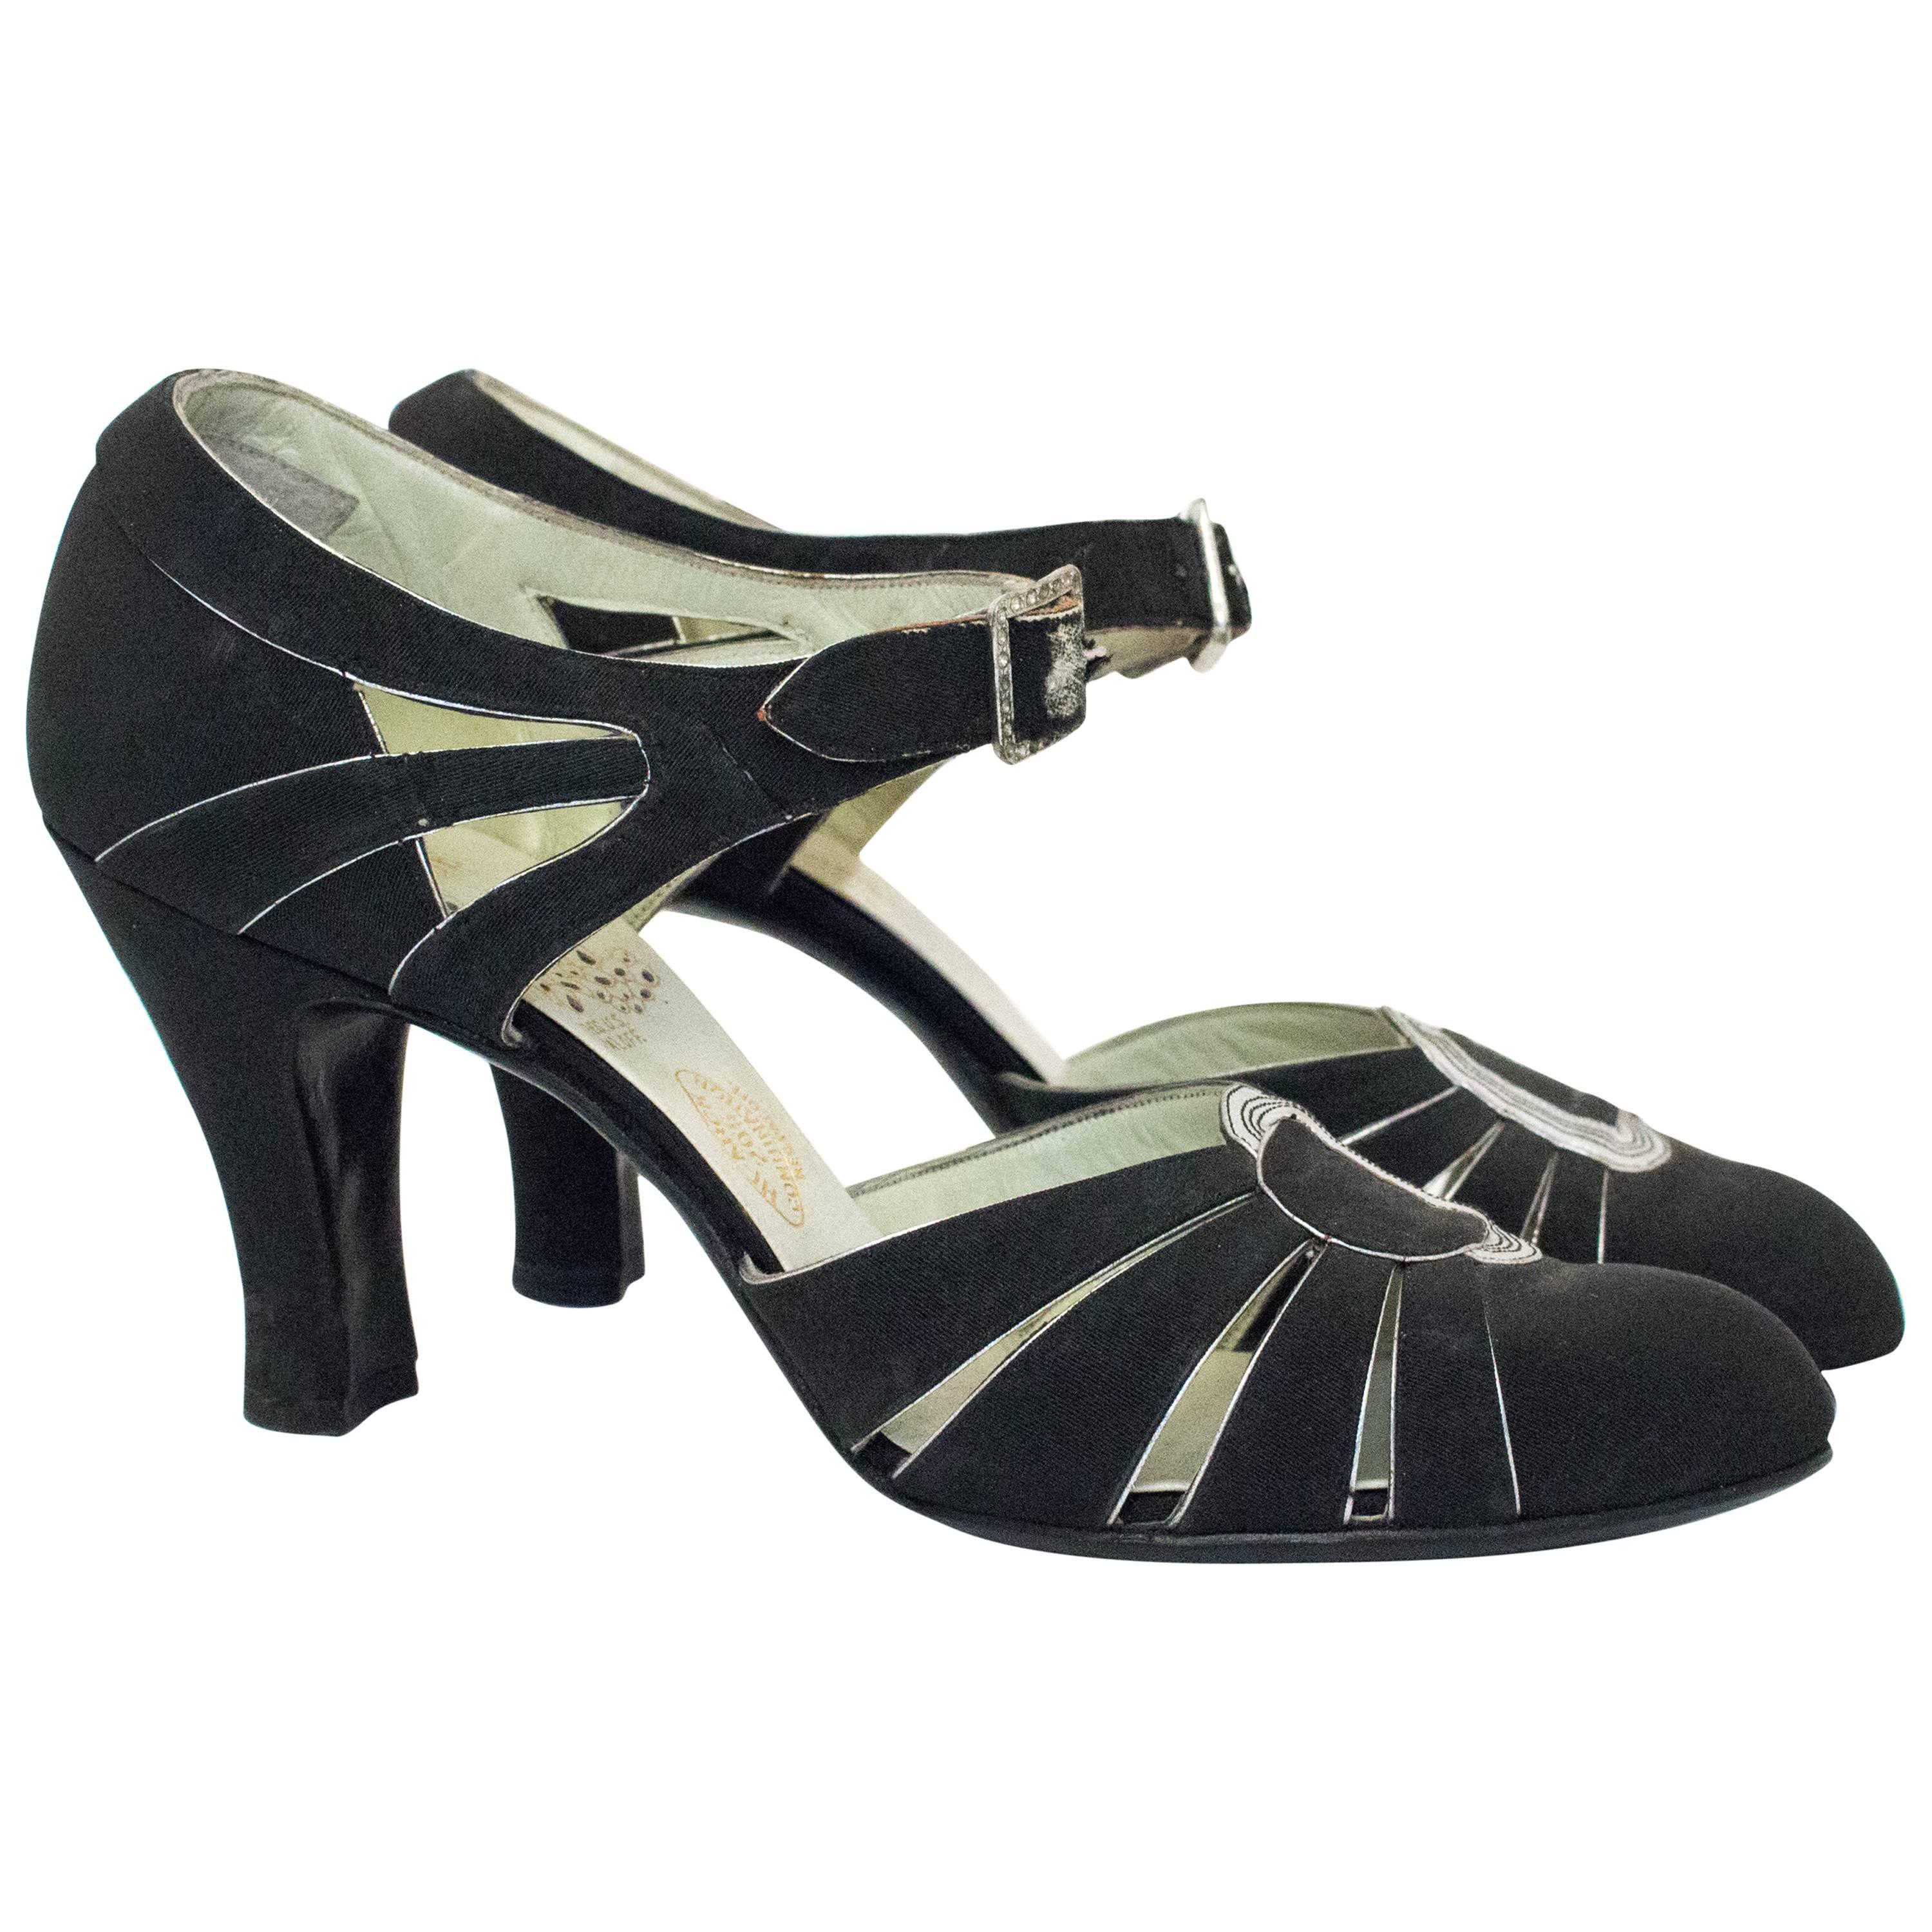 30s Black and Silver Heel with Faux Buckle Top